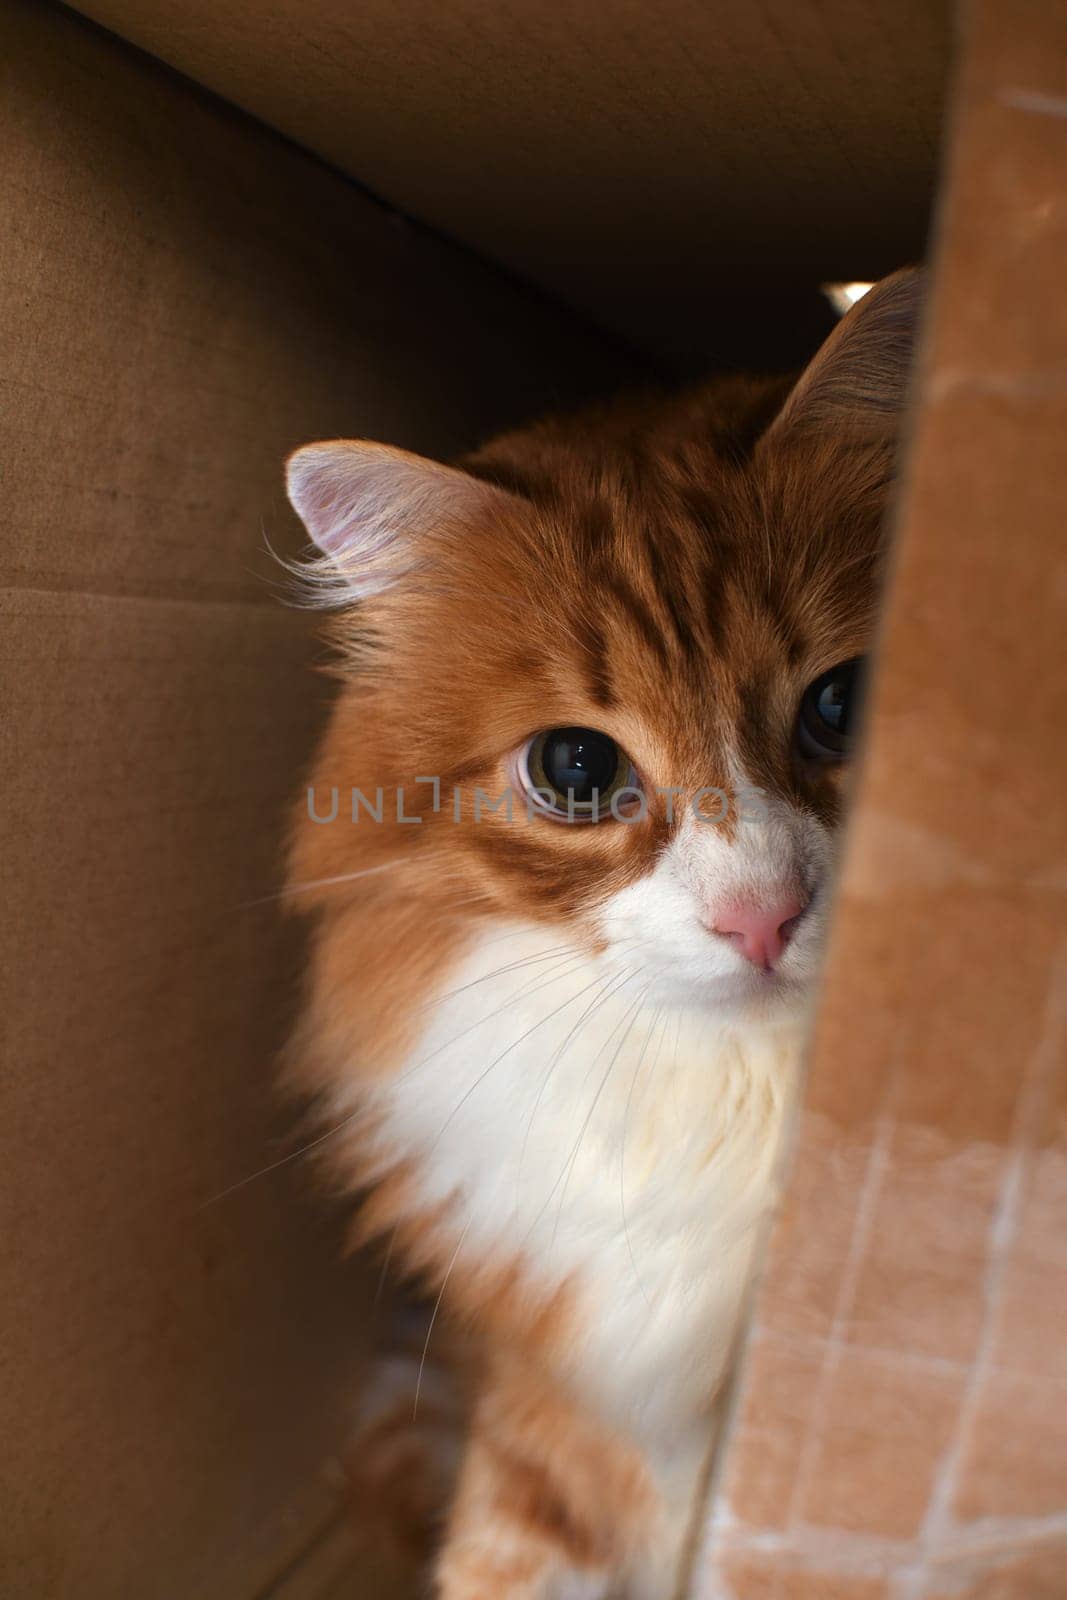 A red cat hidden in a cardboard box carefully and warily watches the target from a hiding place.